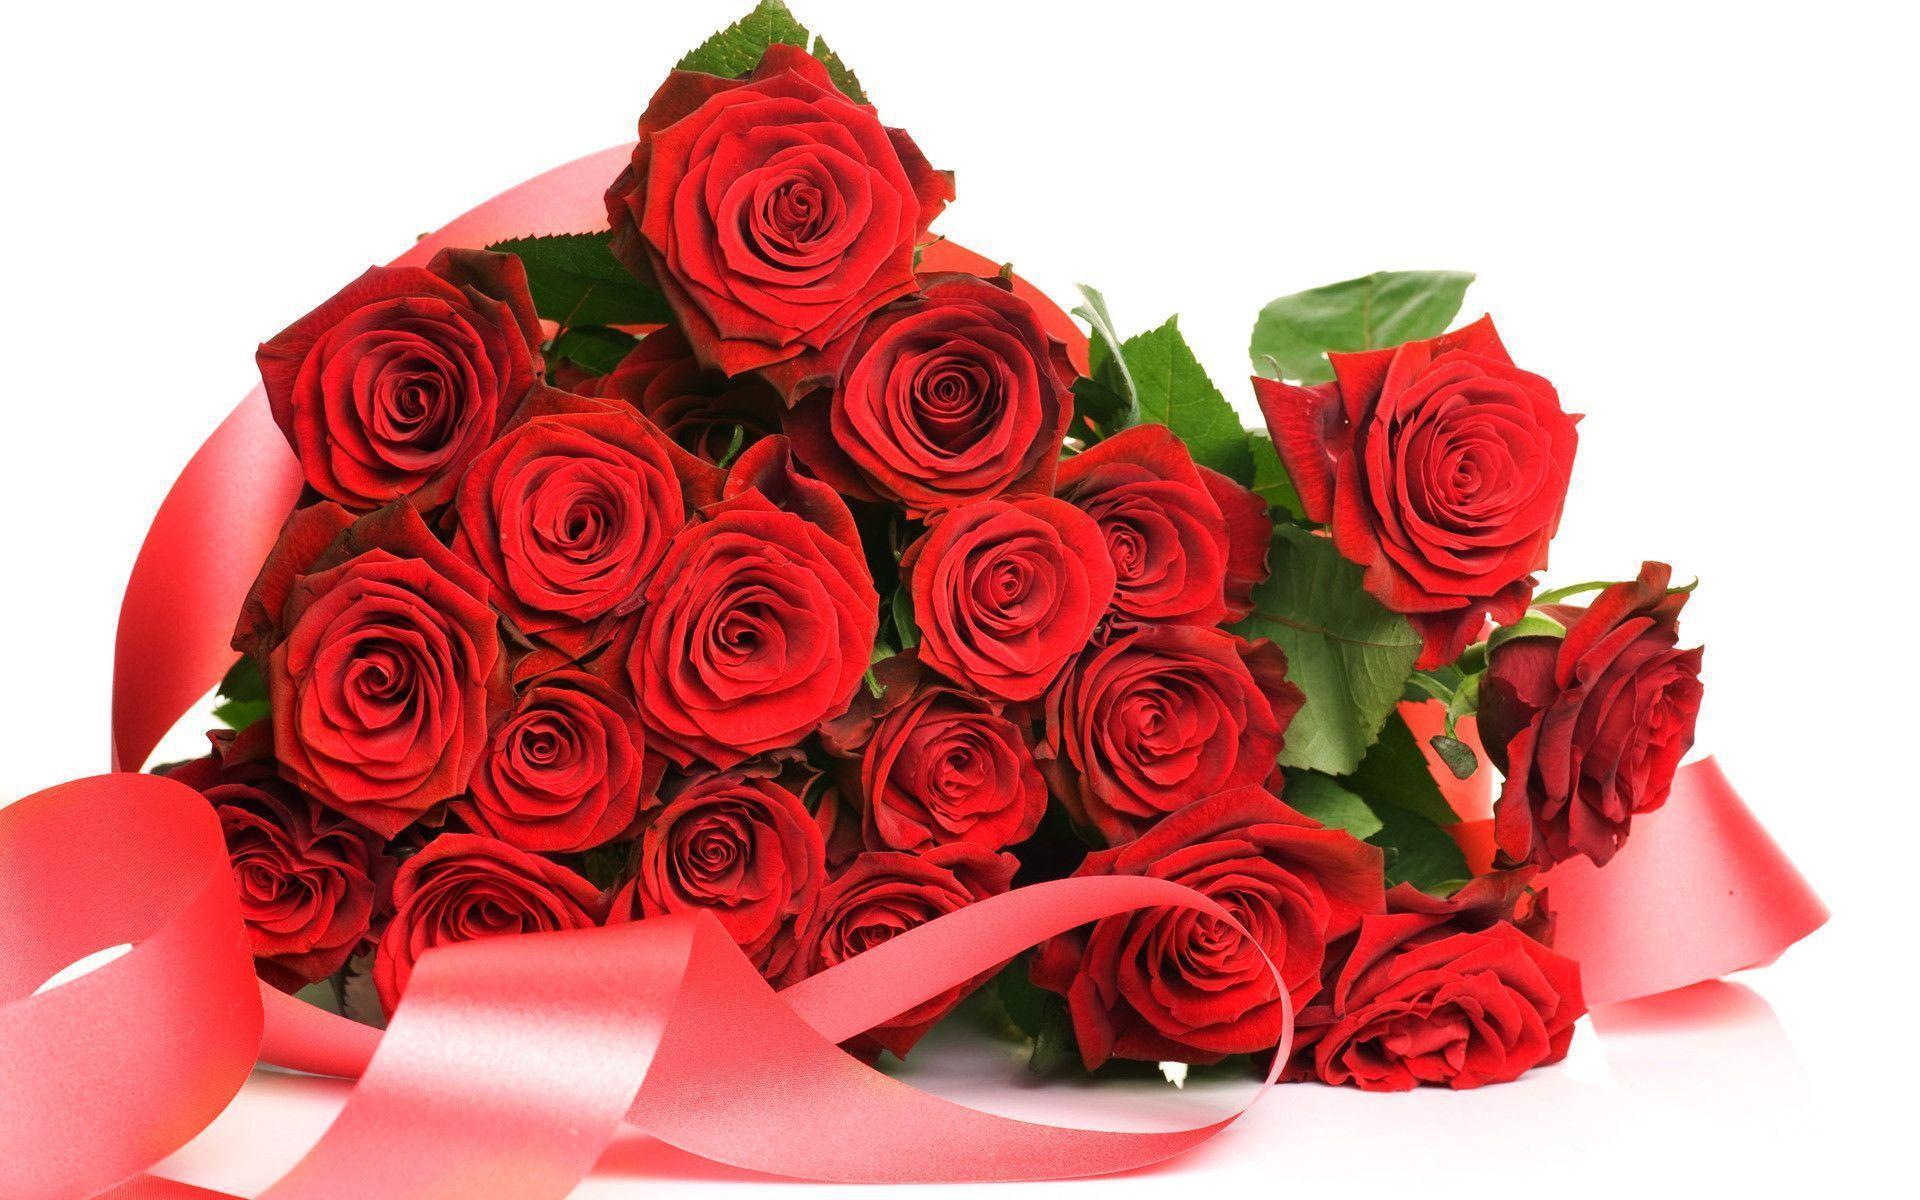 Birthday flowers image red roses